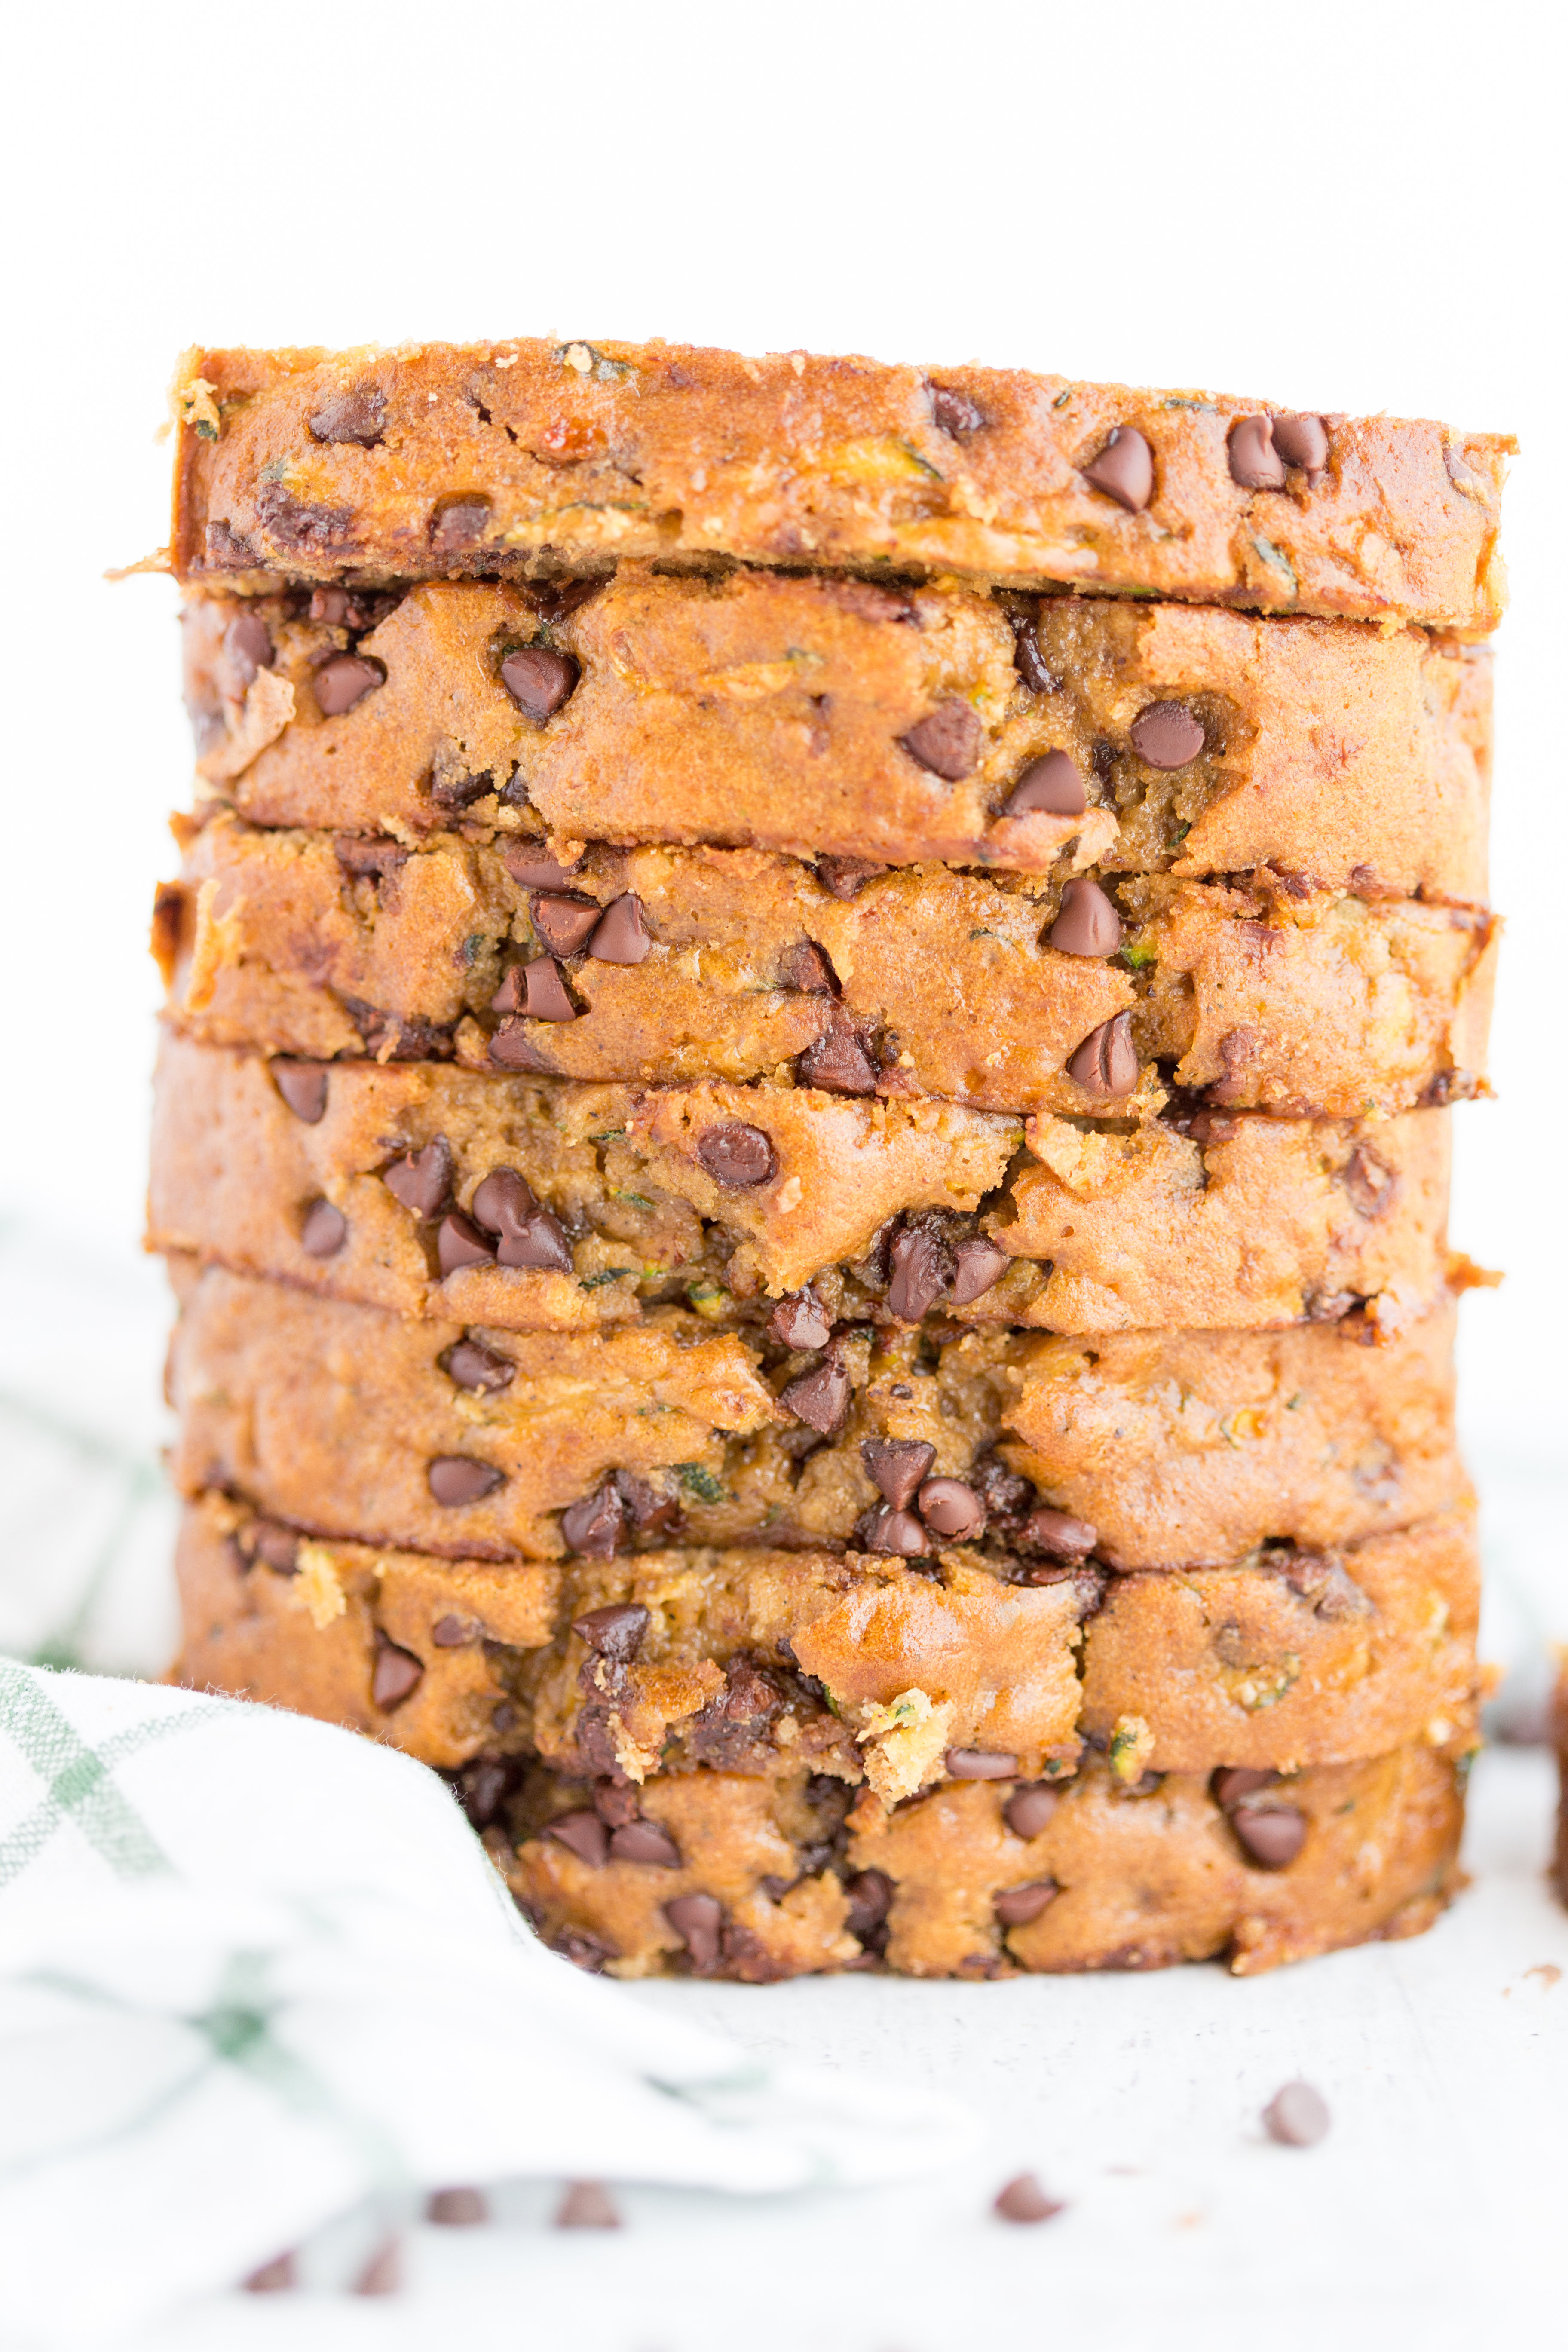 Chocolate Chip Zucchini Bread Slices Stacked